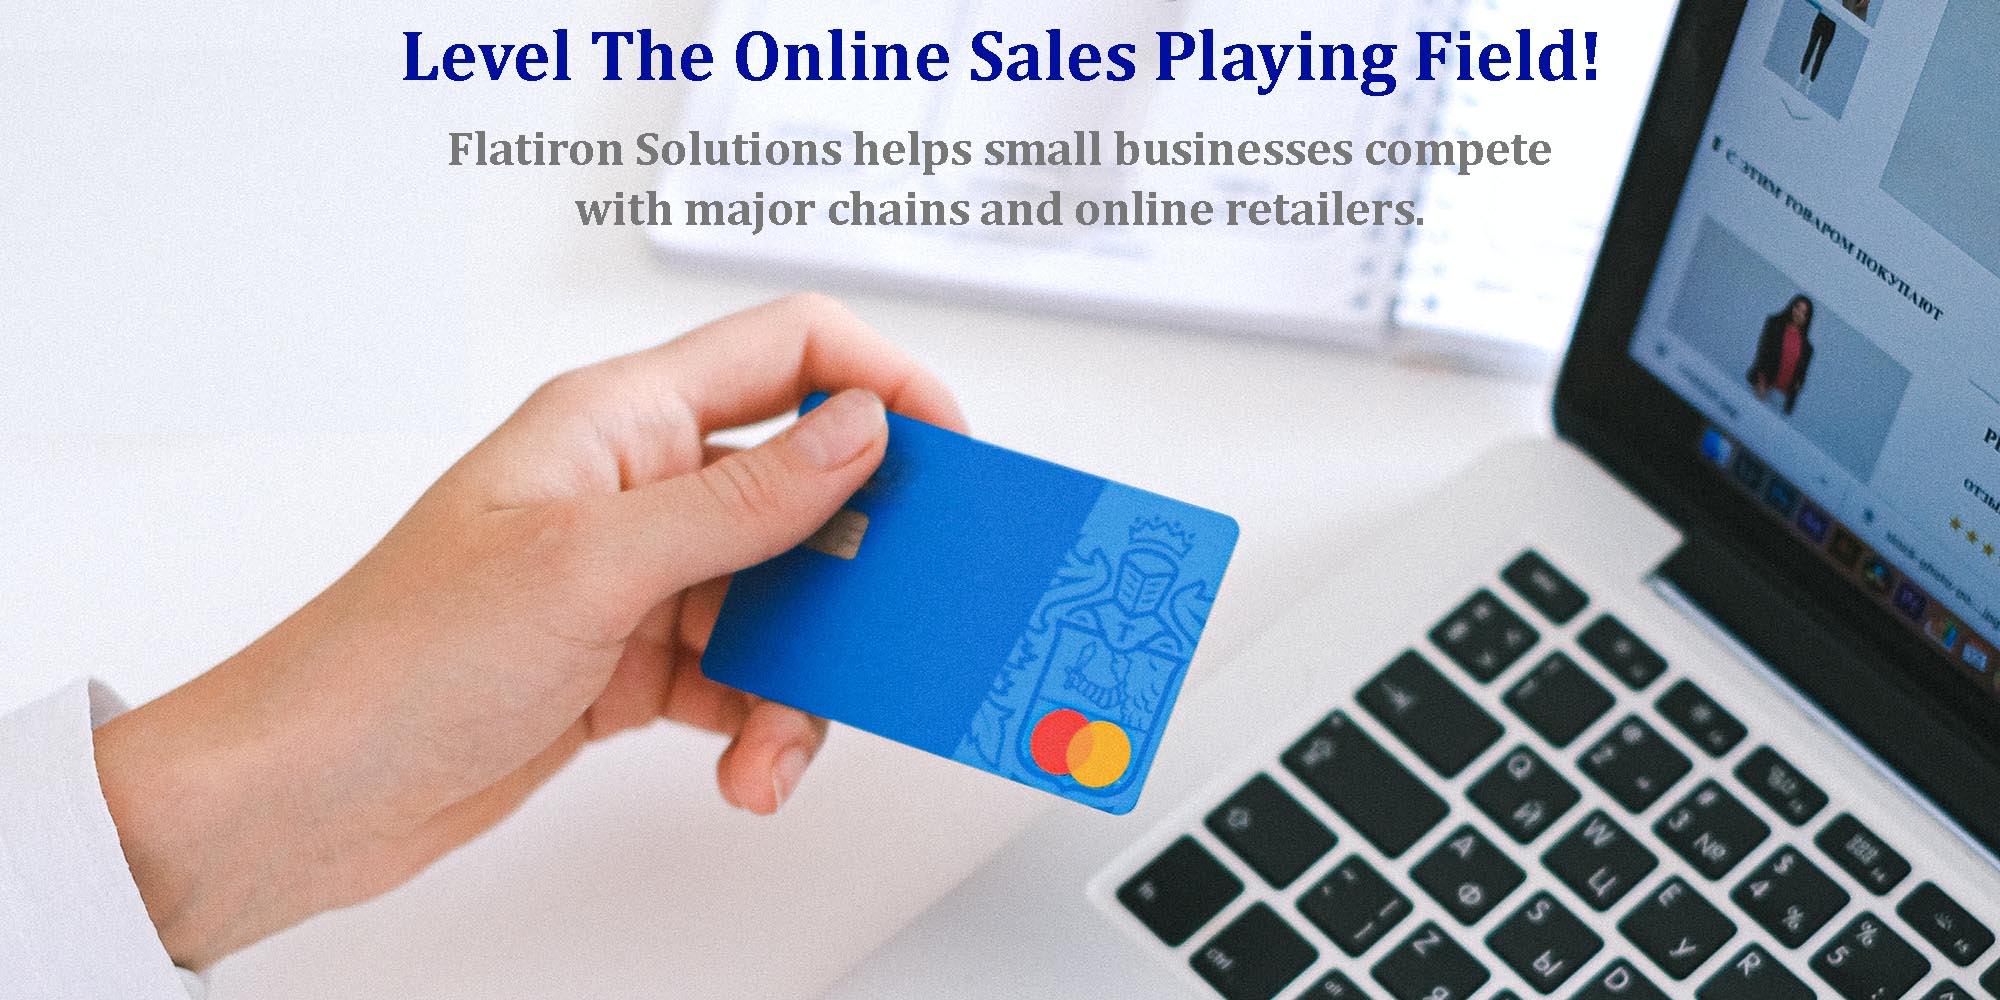 Level The Online Sales Playing Field!